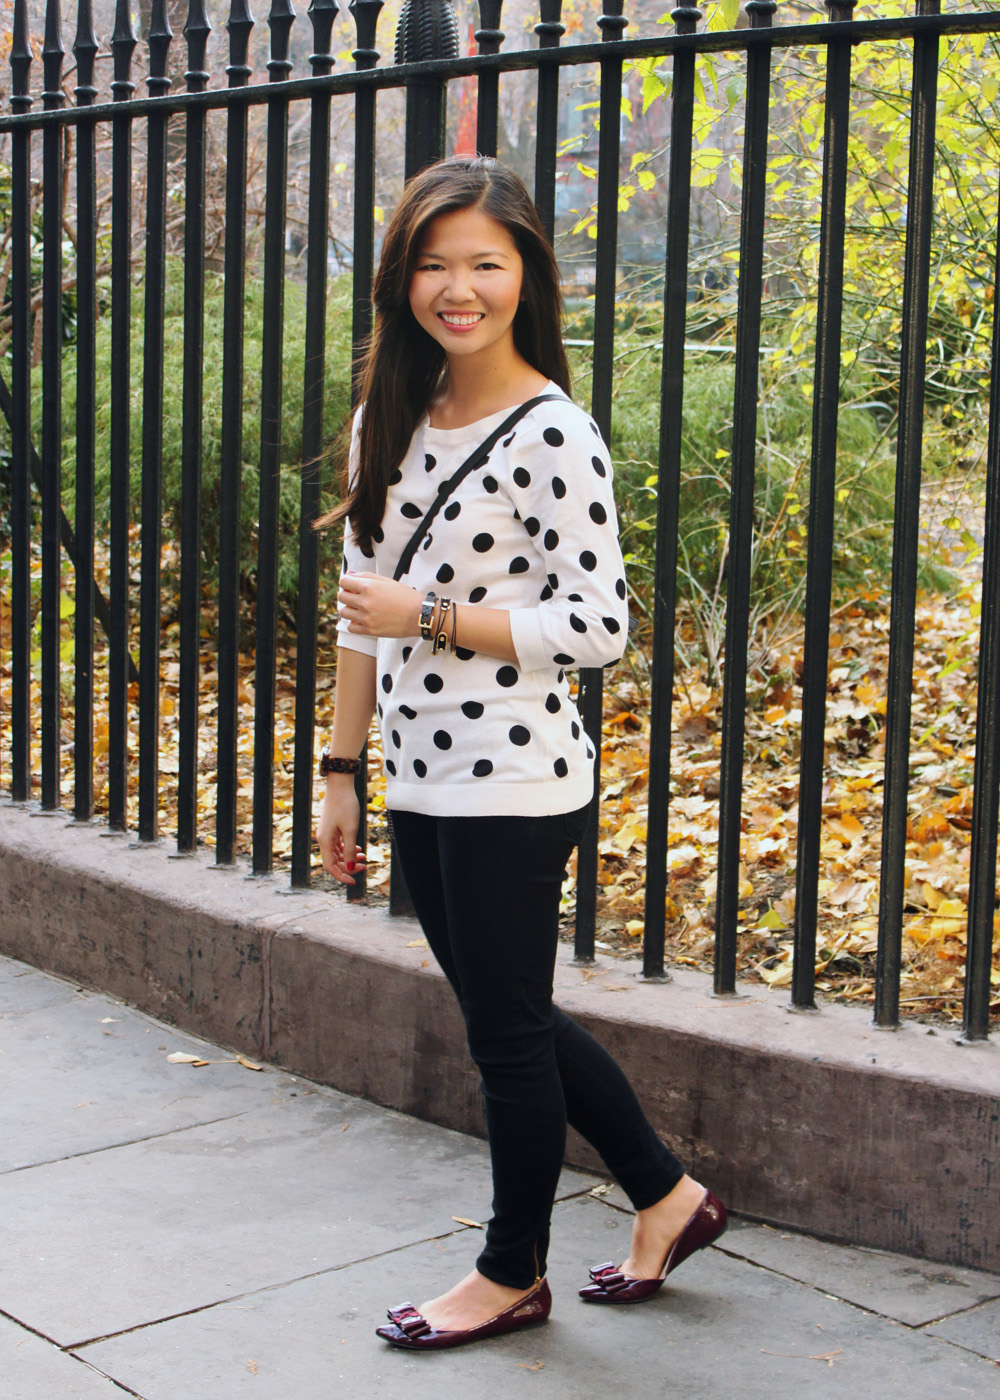 Jenny in Jacquard; NYC fashion blogger; style blog; outfit photos; Old Navy black and white polka dot sweater; Zara black skinny jeggings; Kate Spade black and white striped Scout crossbody bag; KTownsend Etsy black and gold bangles; ShoeMint Hilary bow flat in oxblood; Michael Kors tortoise gold boyfriend watch